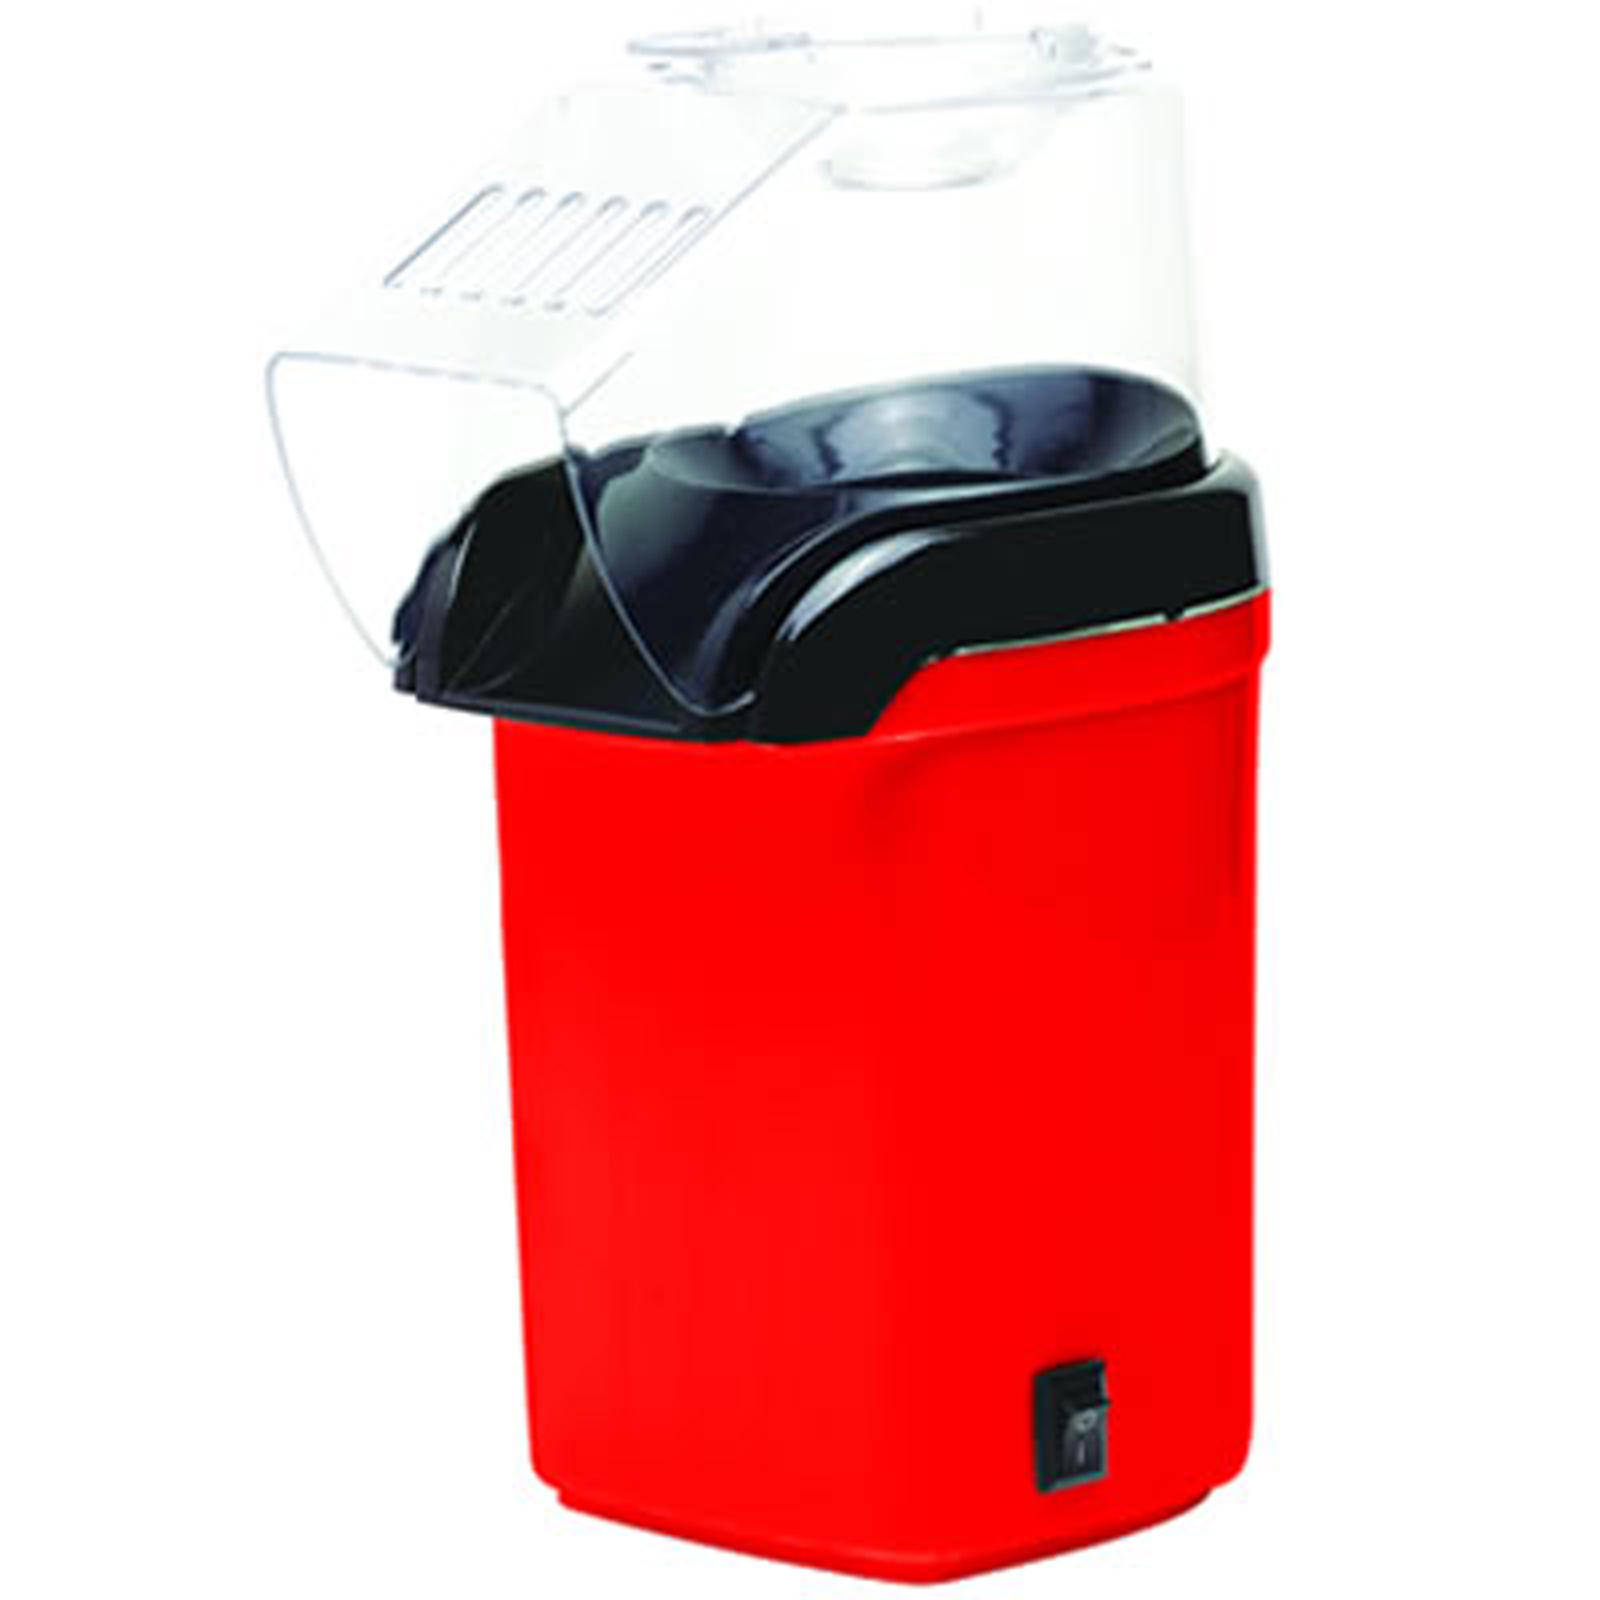 Brentwood 97086529M Hot Air Popcorn Maker - Red